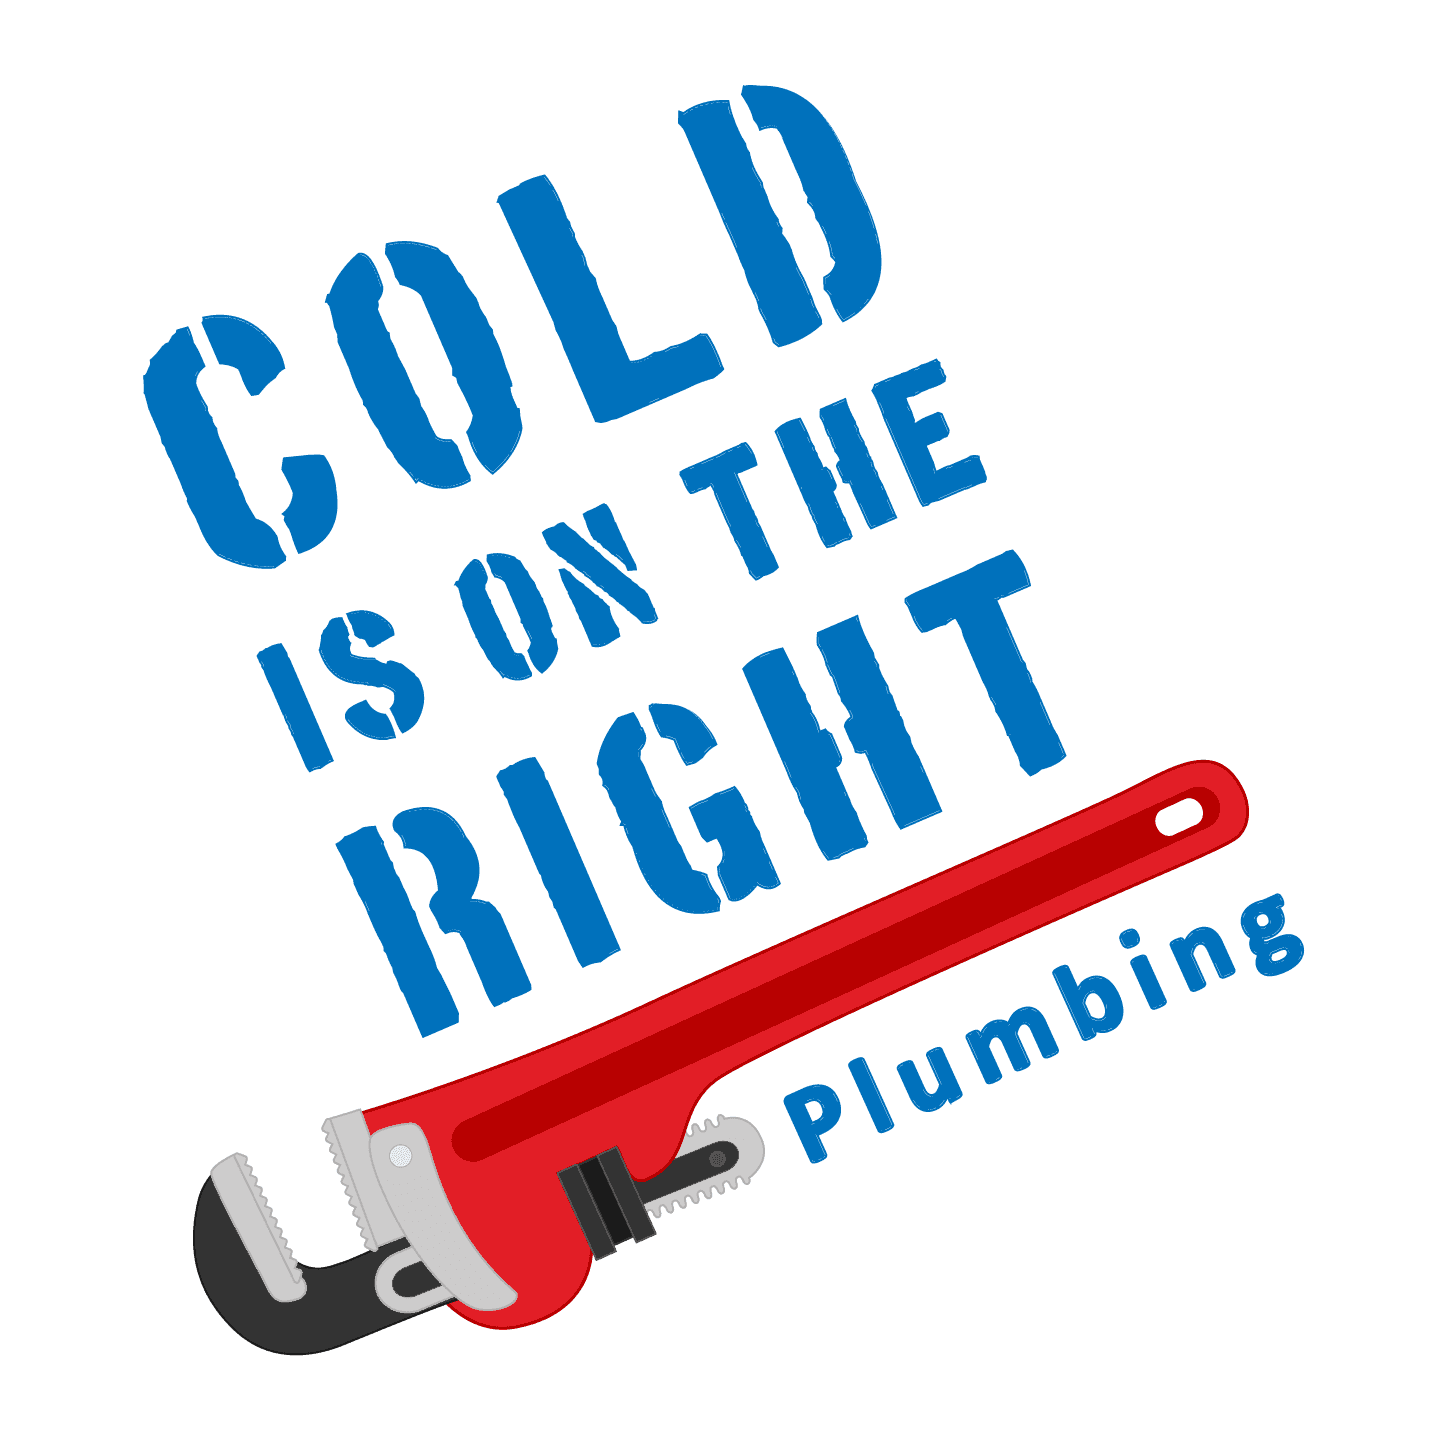 Cold is on the Right Plumbing logo